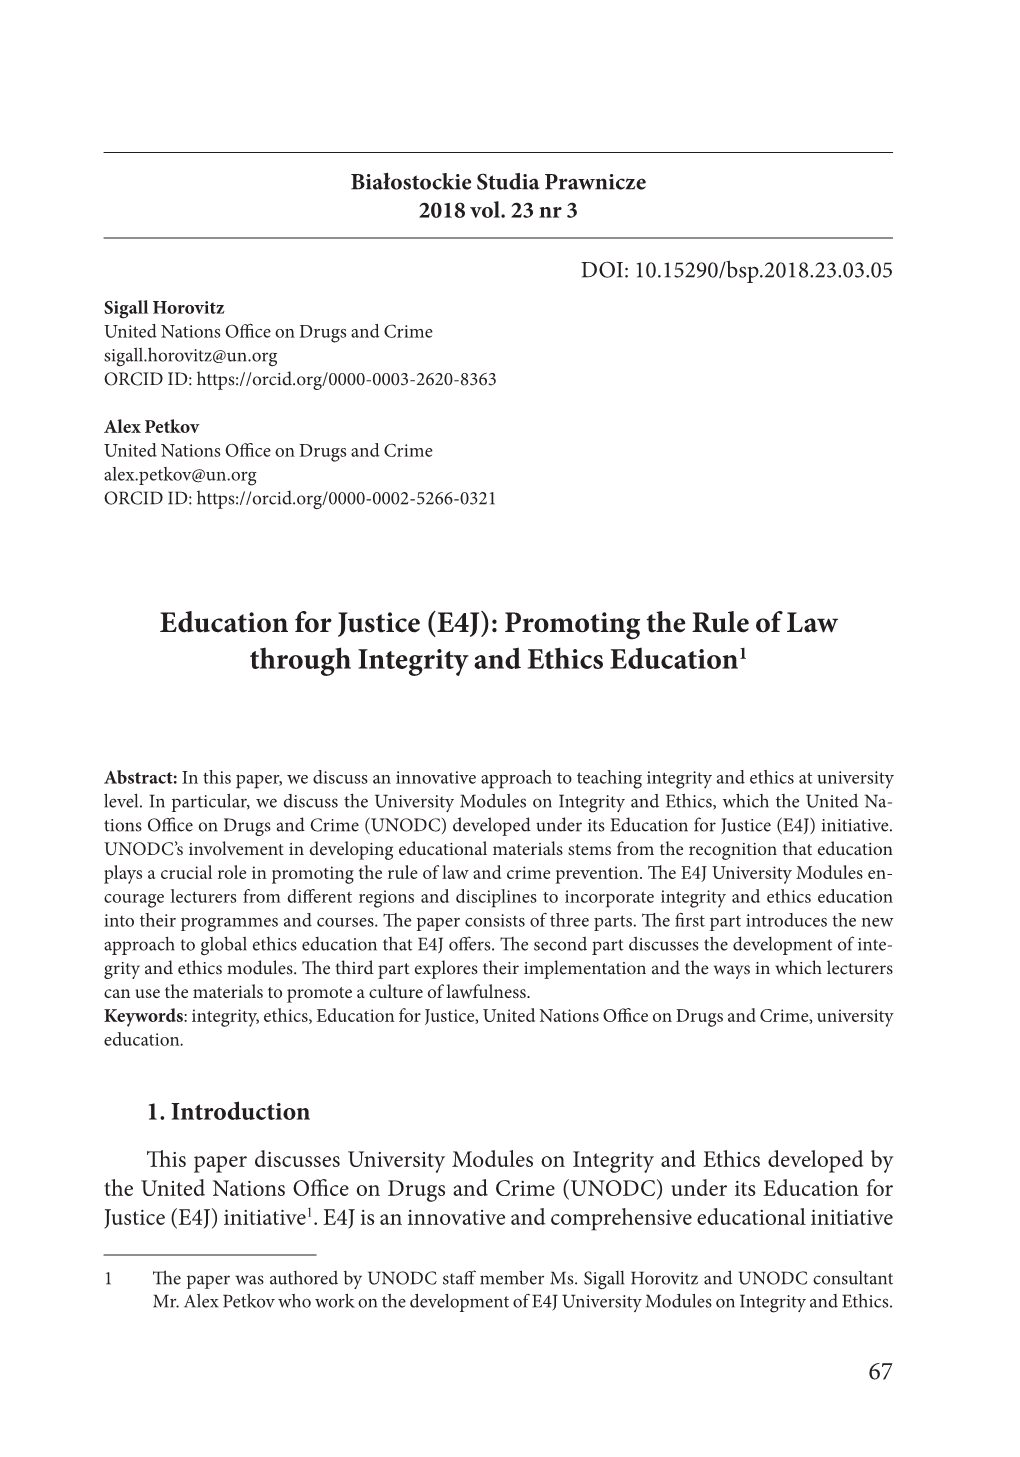 Education for Justice (E4J): Promoting the Rule of Law Through Integrity and Ethics Education1